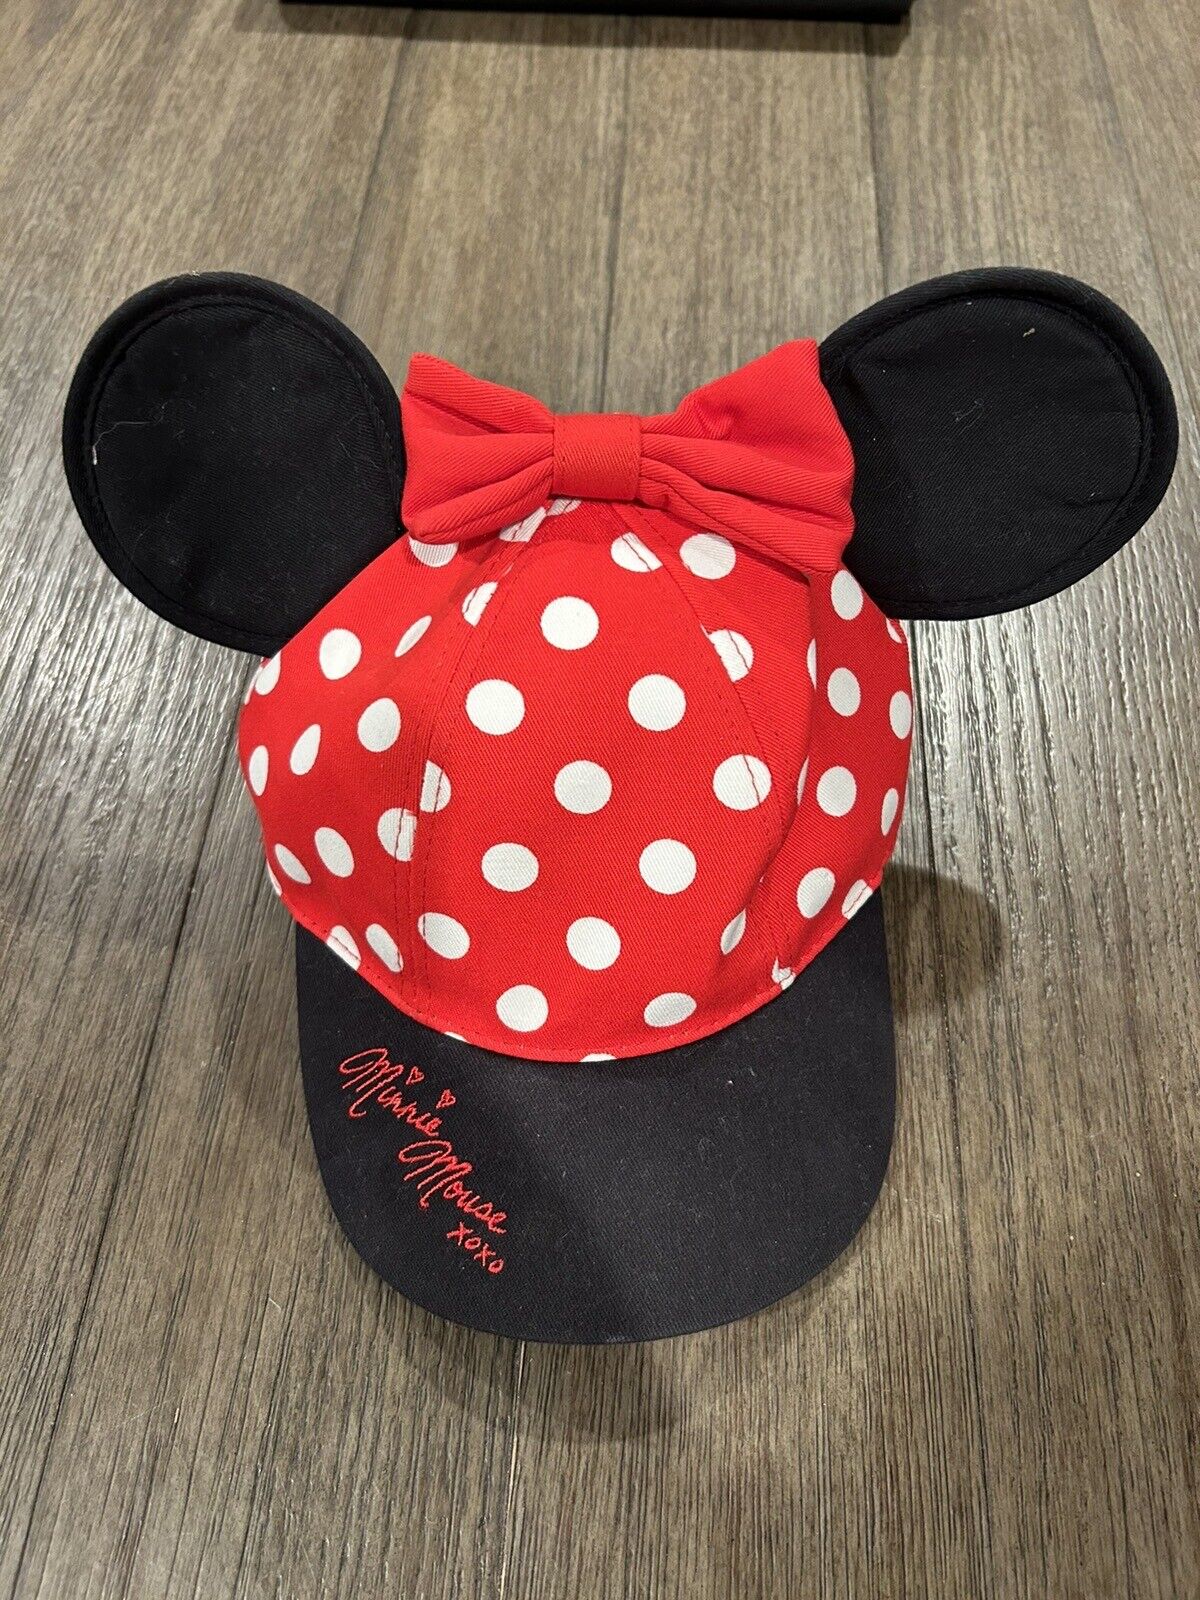 Disney Parks Minnie Mouse Youth Baseball Red Polka Dot Hat Cap w/ Ears And Bow